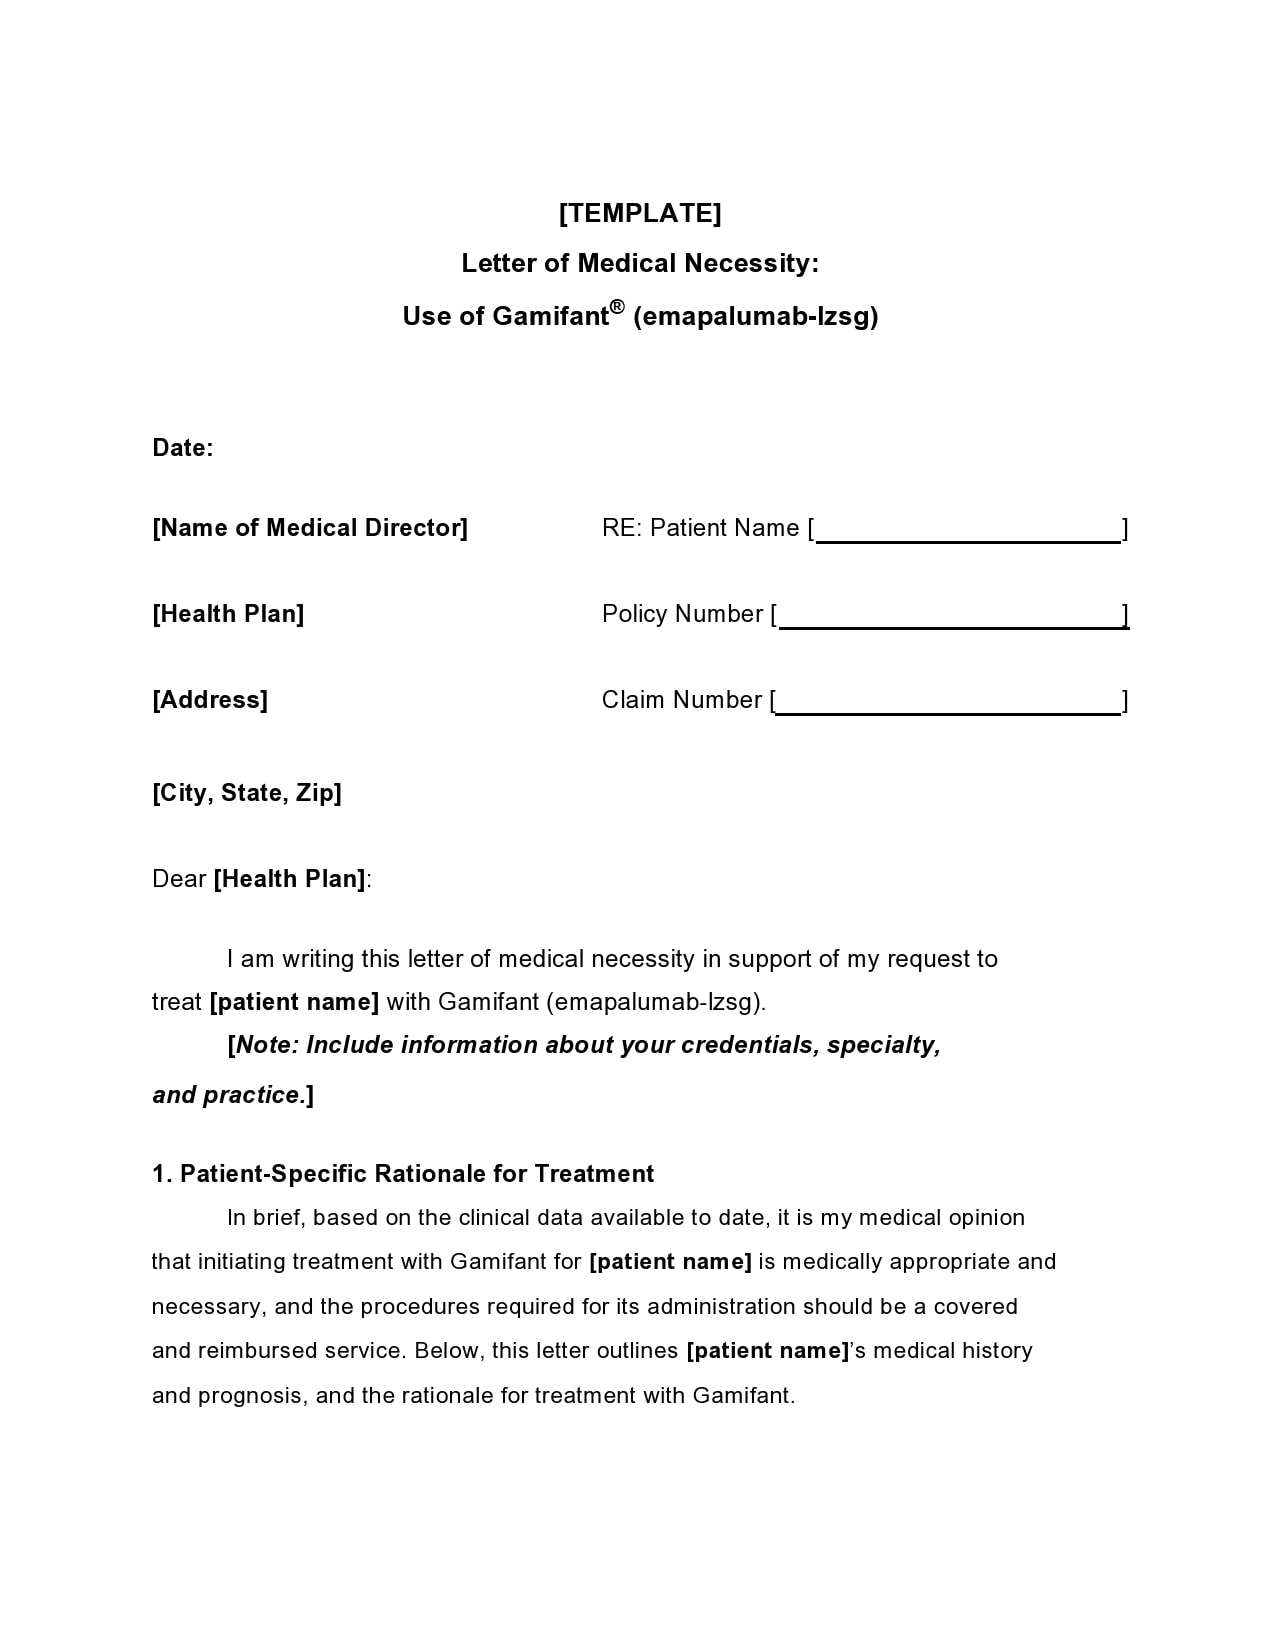 40 Best Letter Of Medical Necessity Templates And Examples 3902